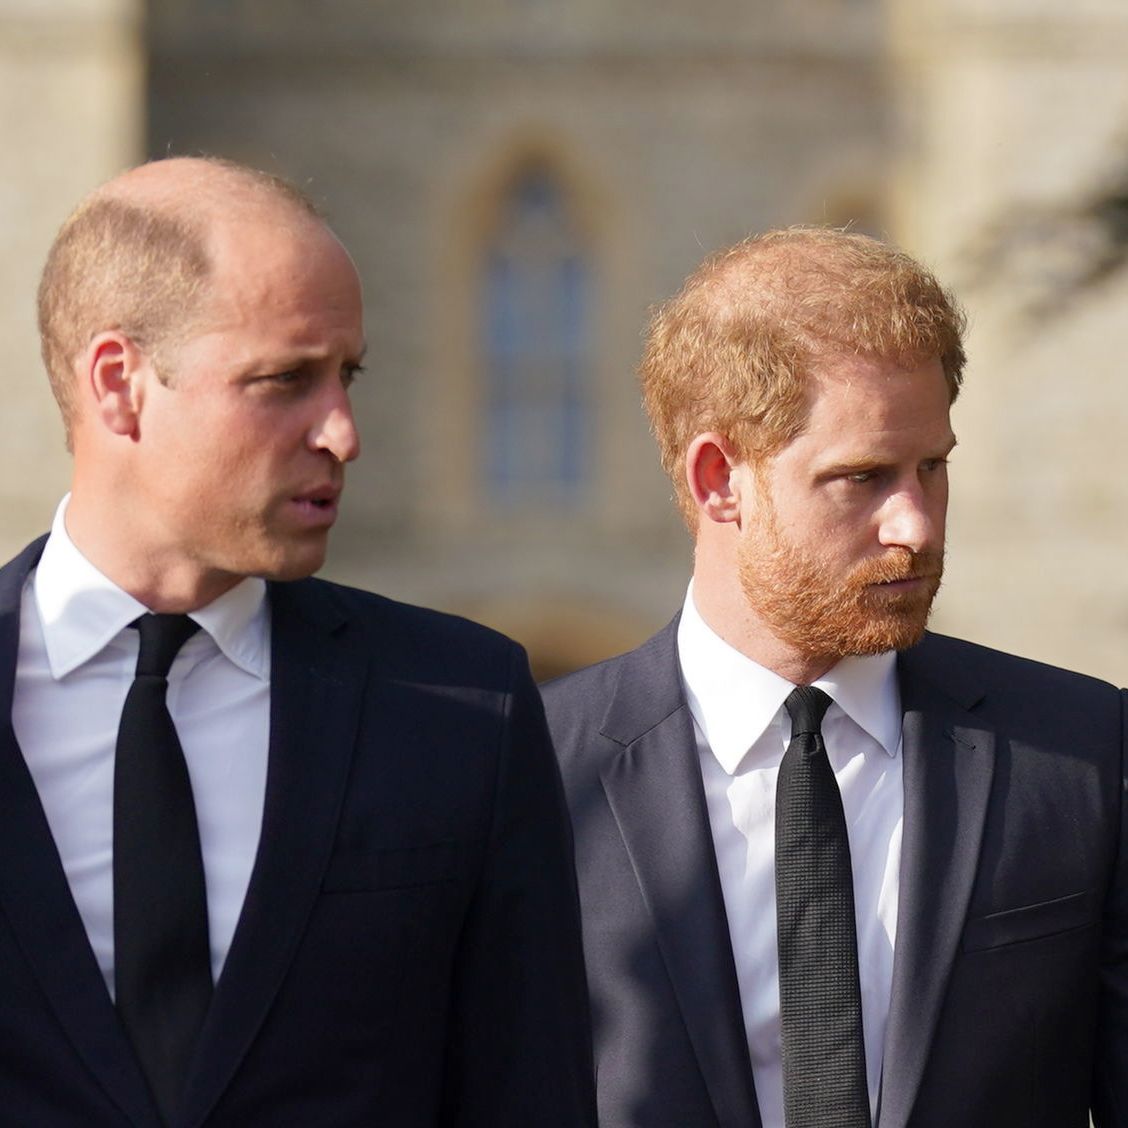 A source detailed why the Sussexes and Waleses aren't about to make amends.